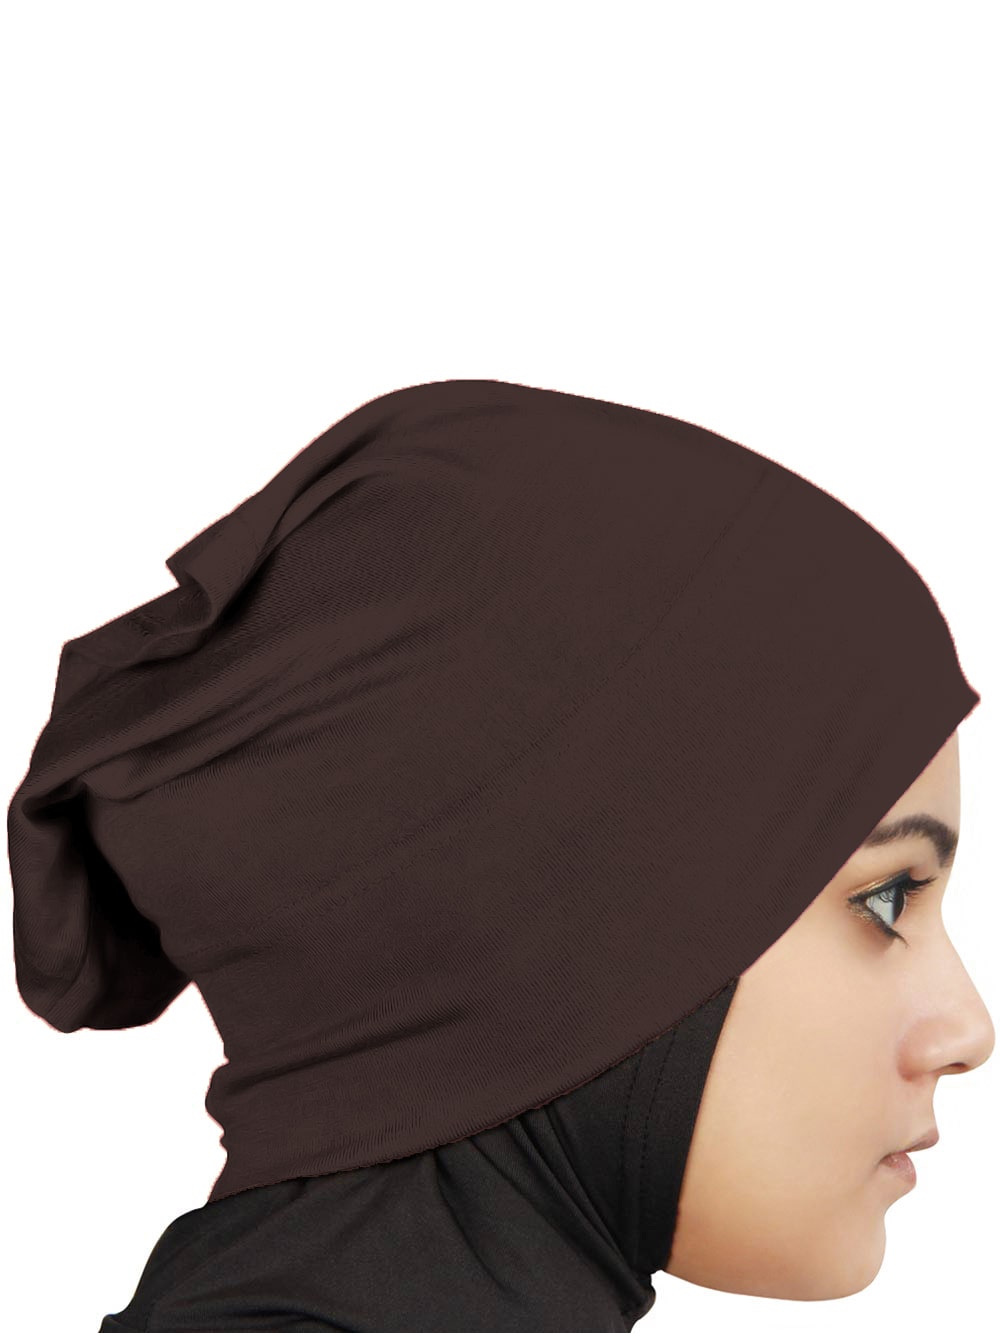 Two Piece Instant Brown Viscose Jersey Hijab